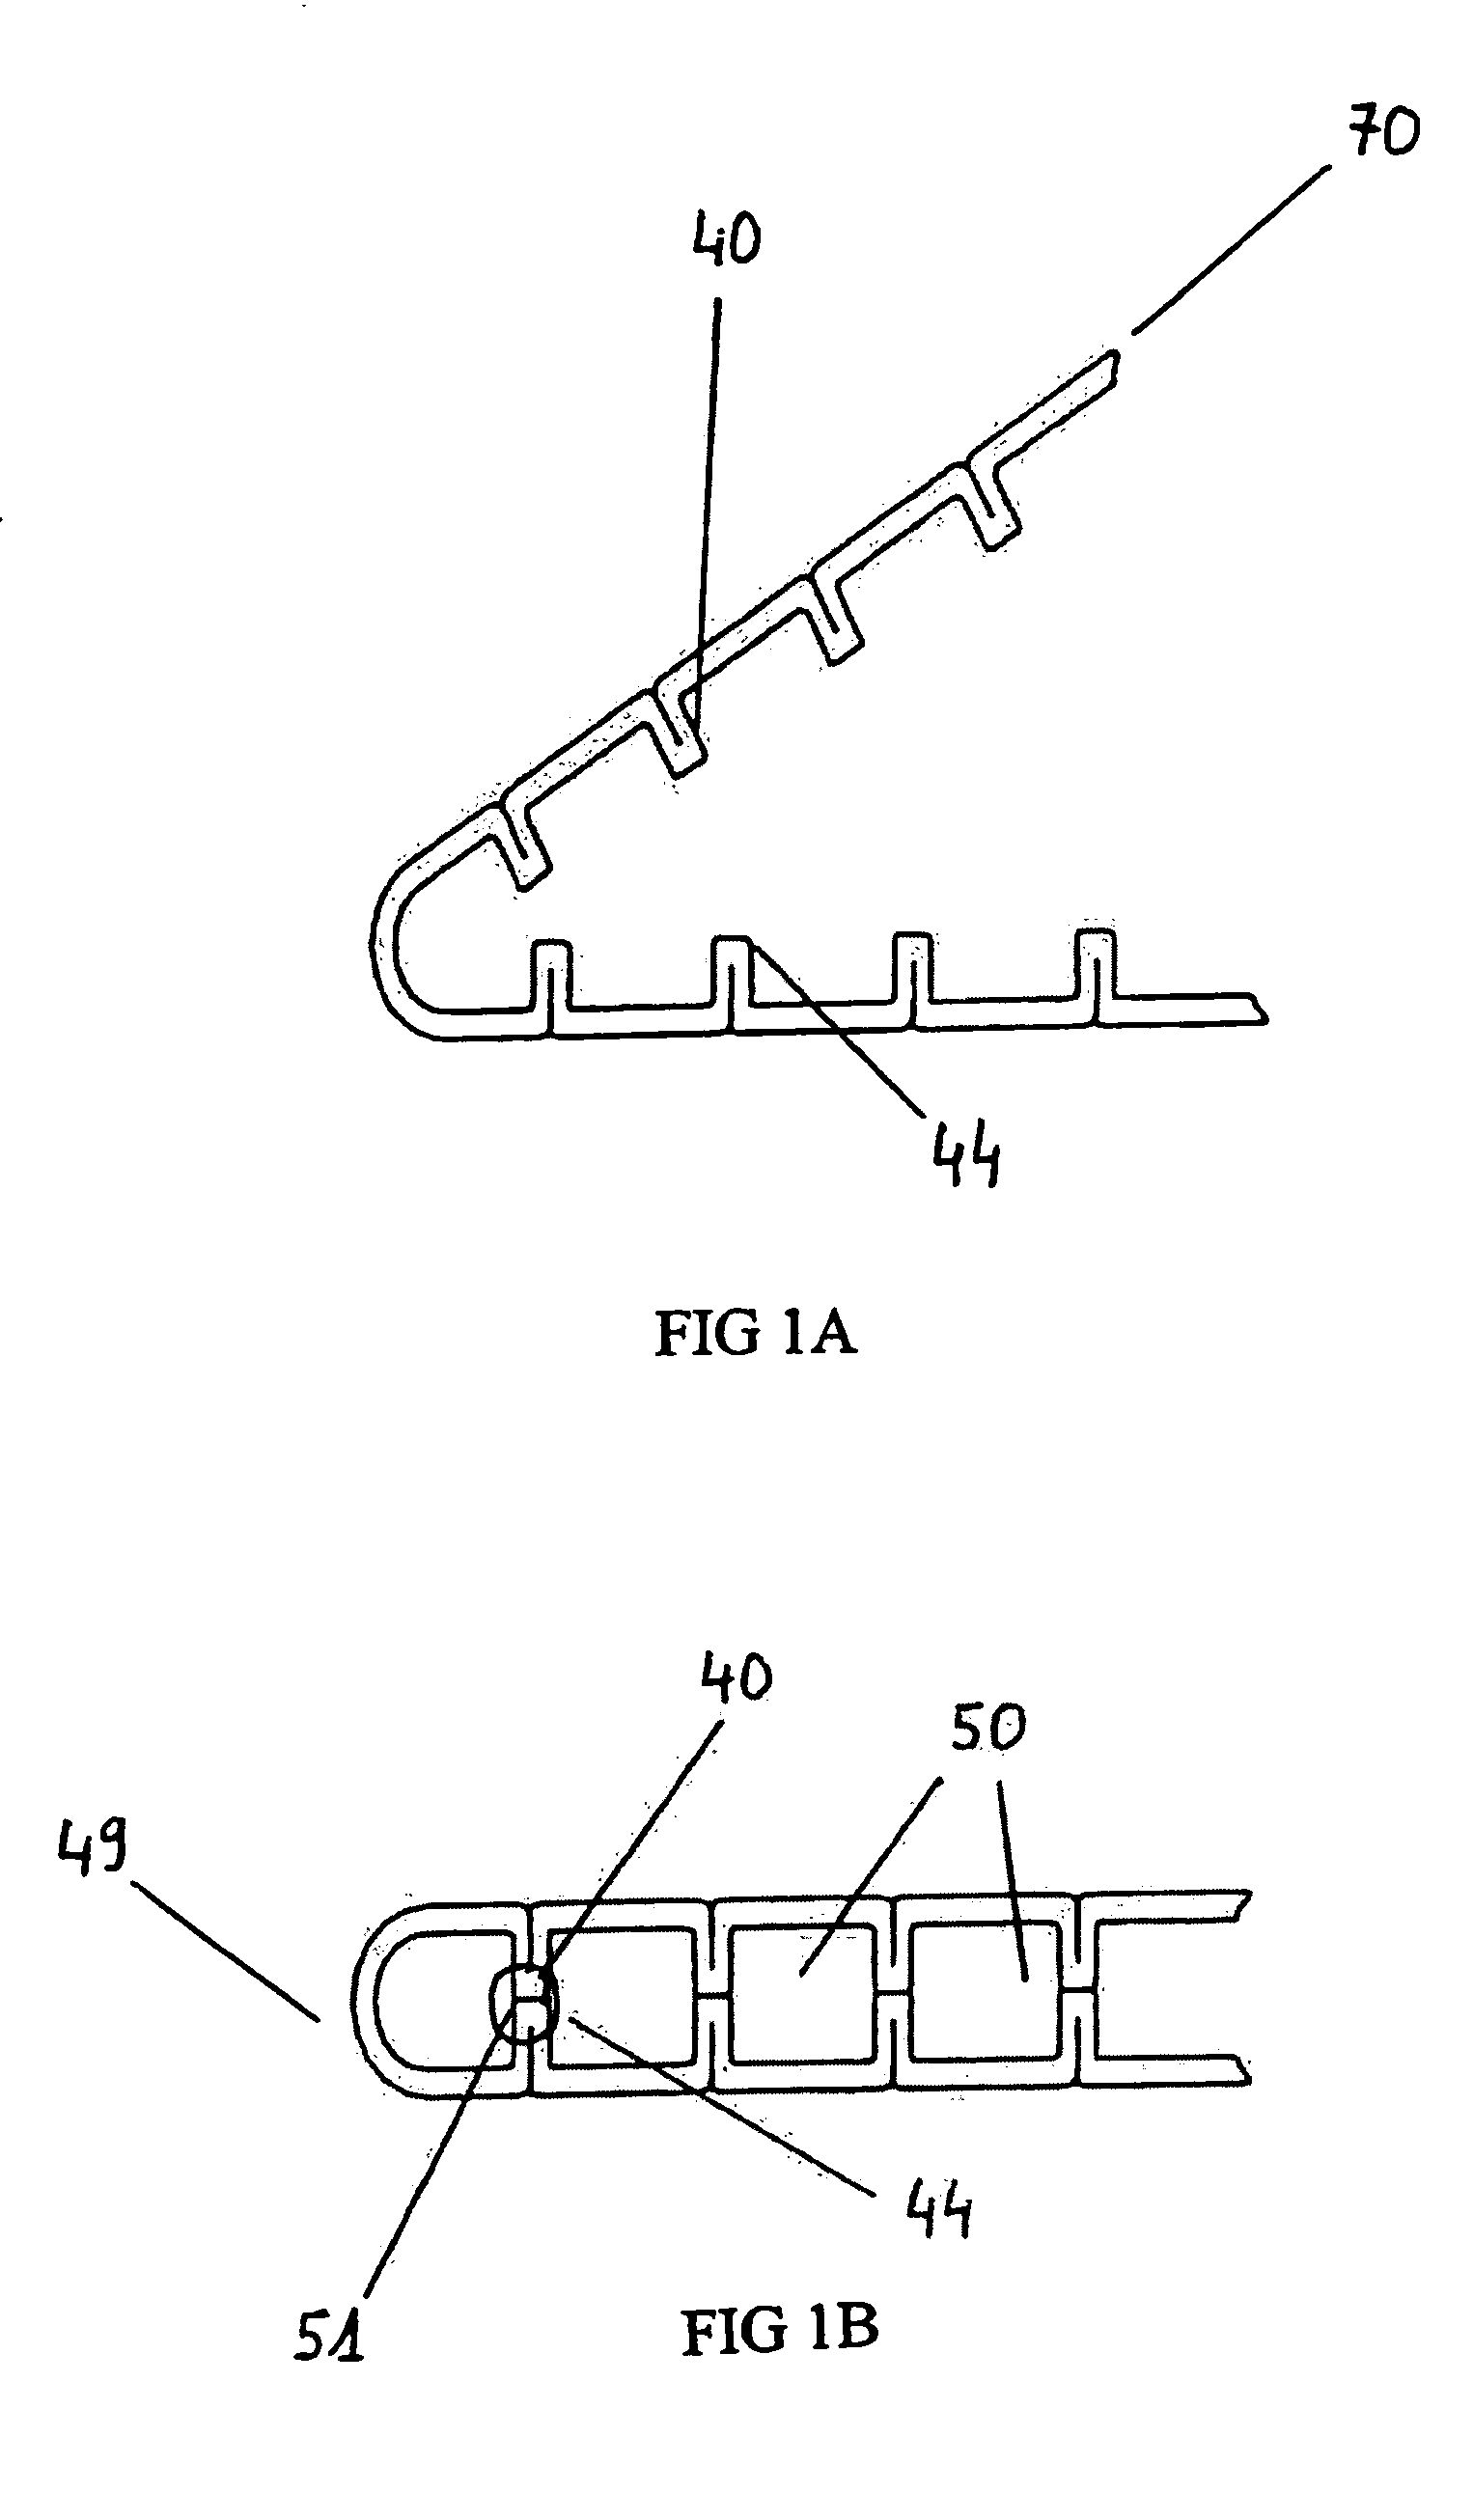 Folded tube for a heat exchanger and method of making same